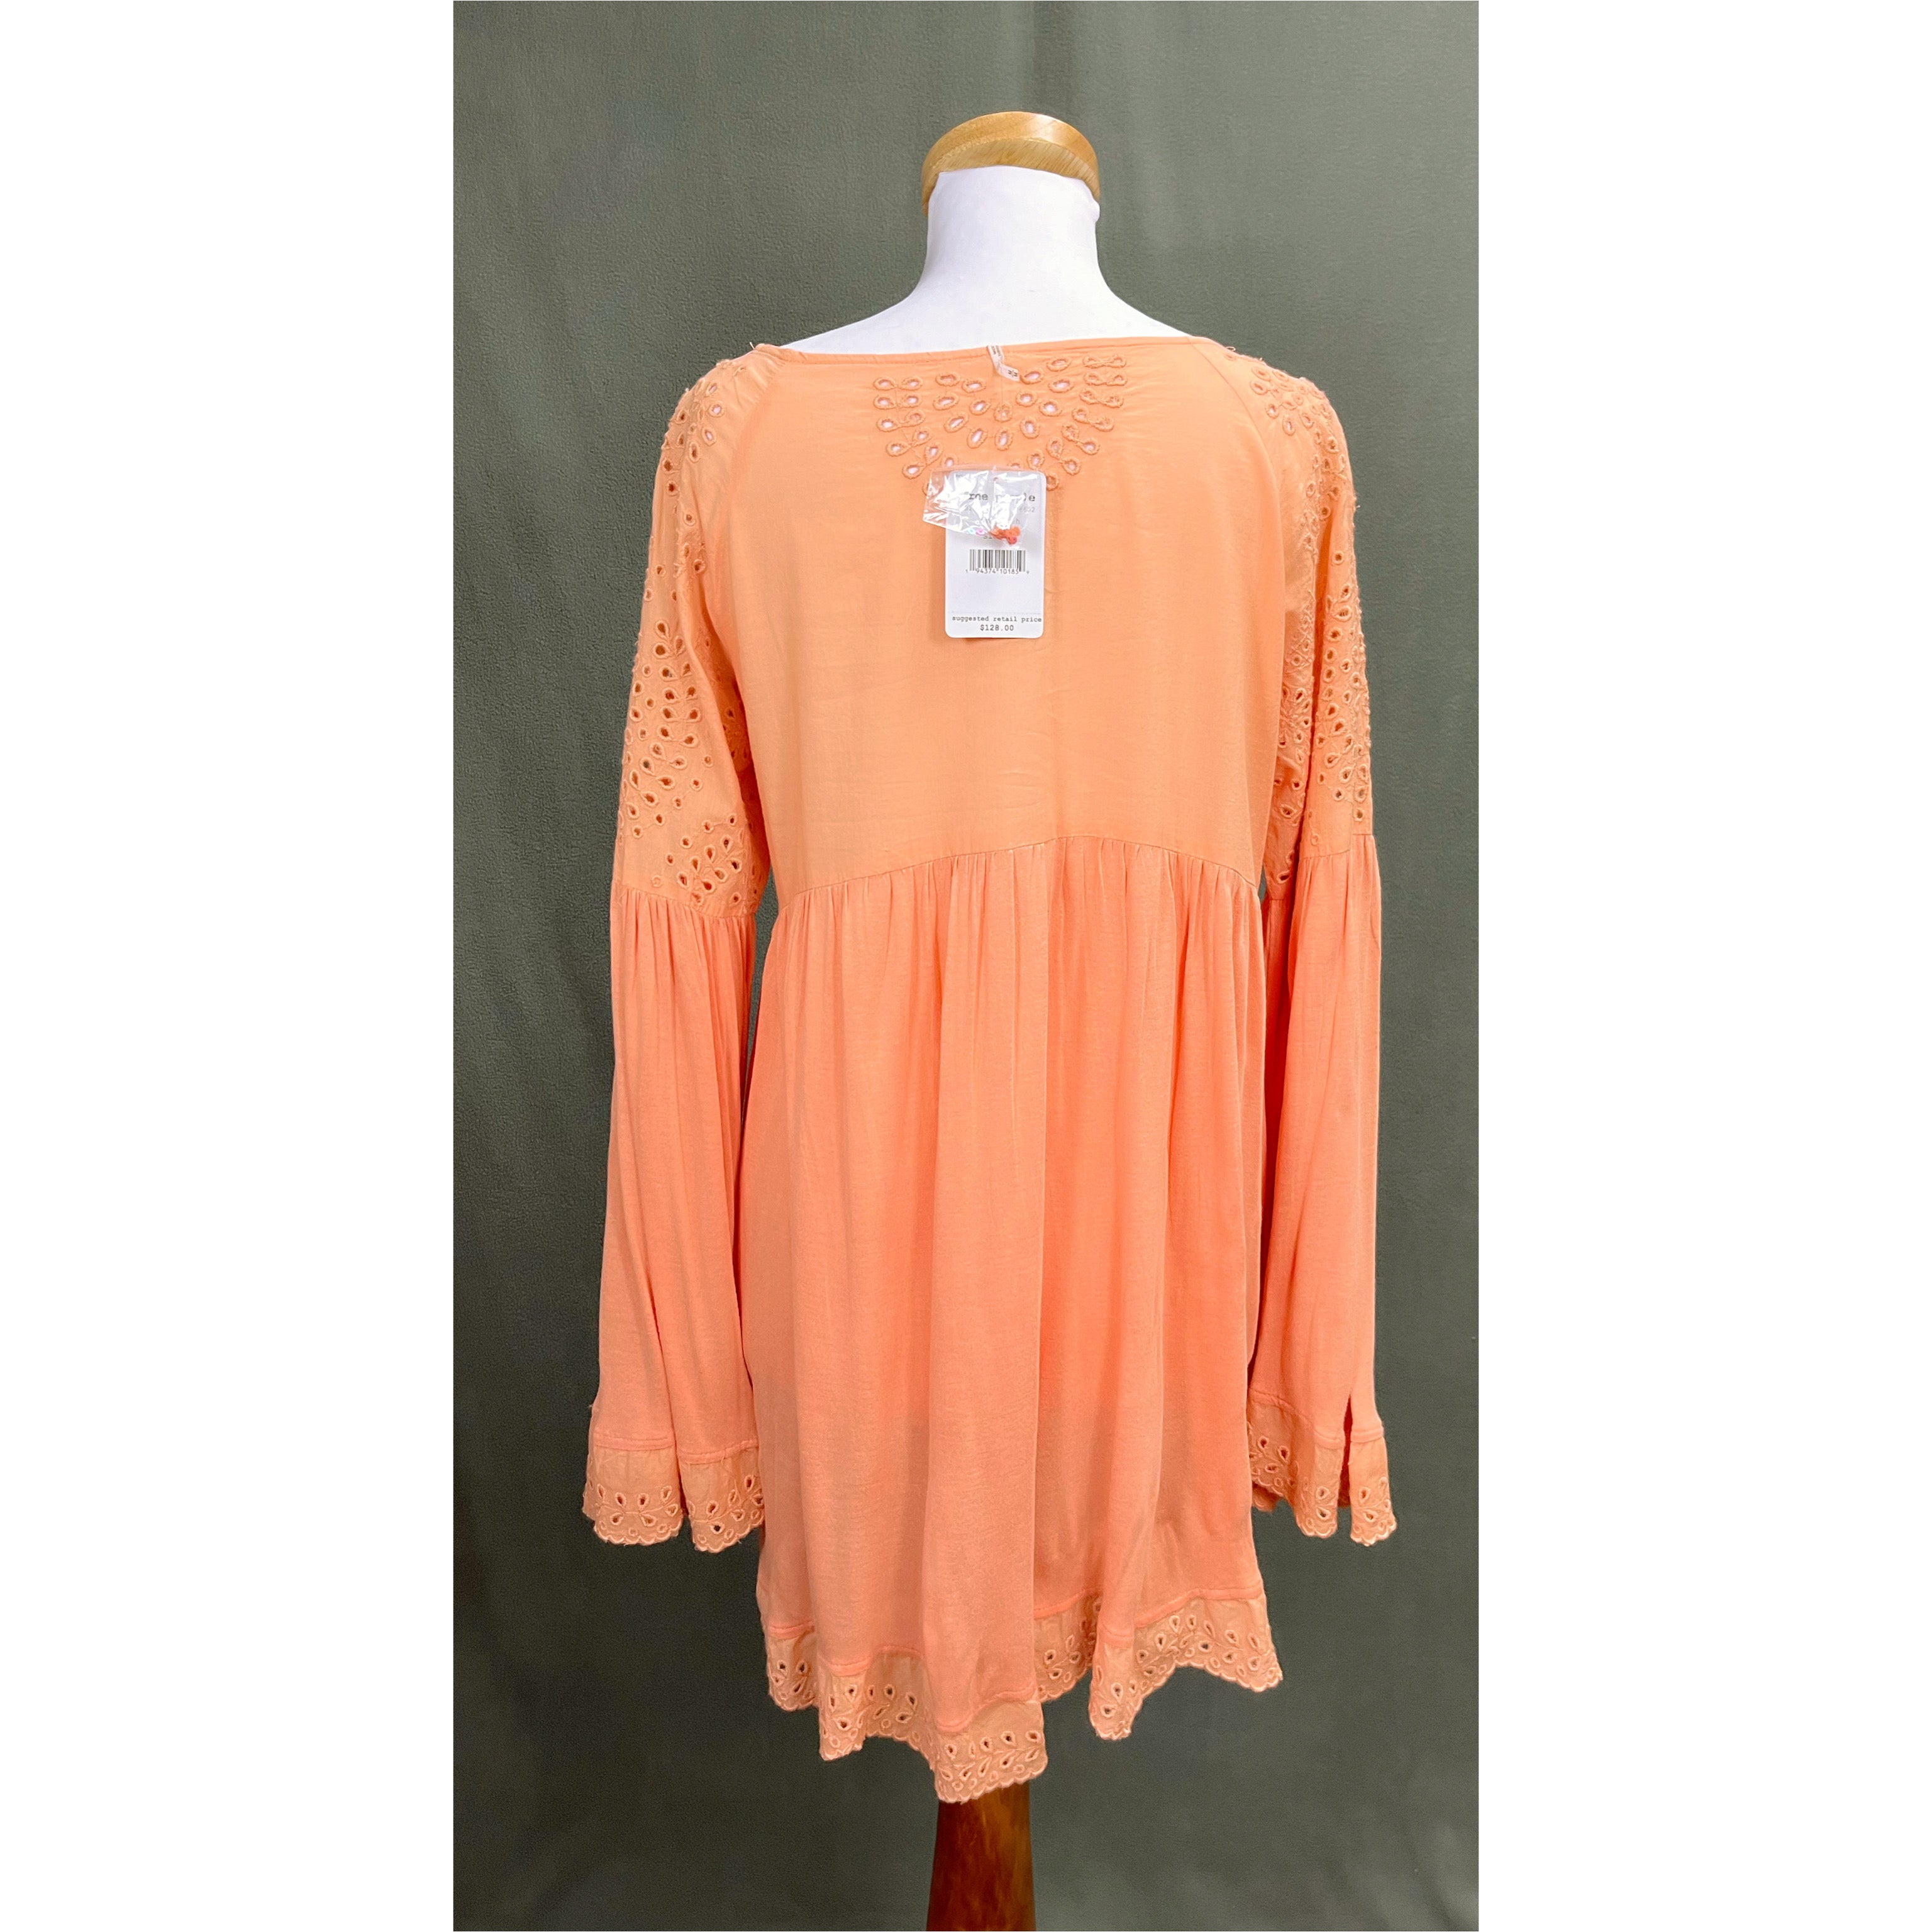 Johnny Was peach blouse, size M, NEW WITH TAGS!